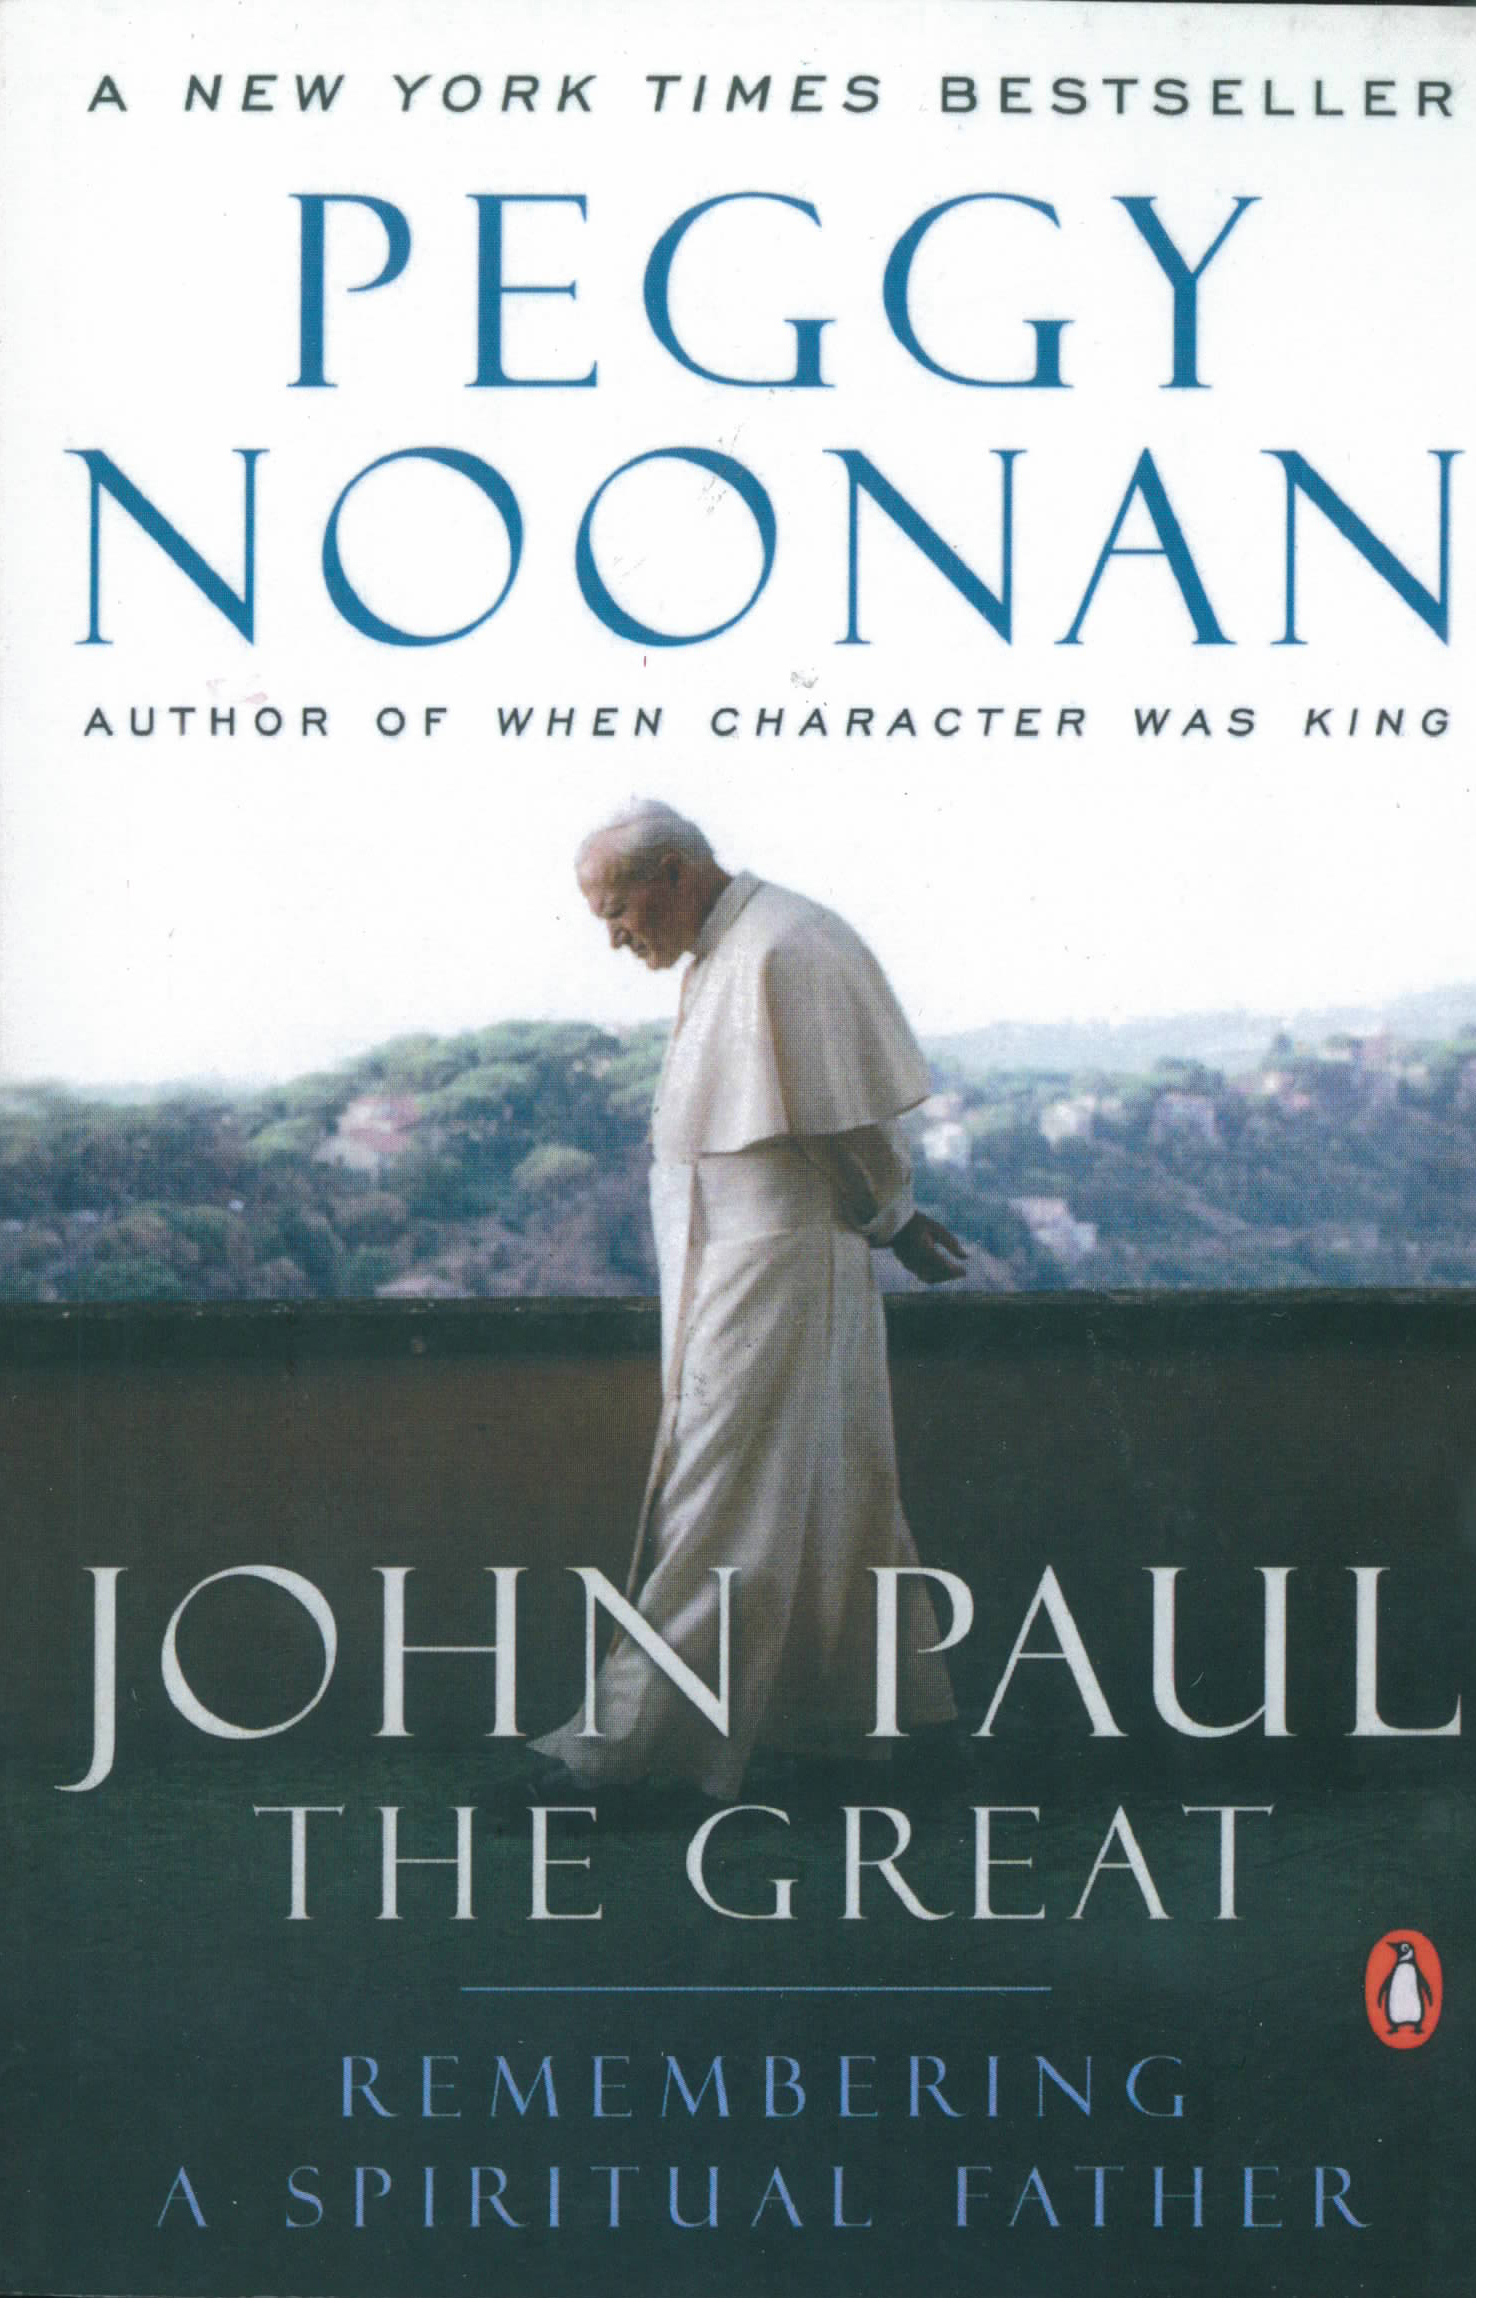 John Paul The Great by Peggy Noonan 108-9780143037941